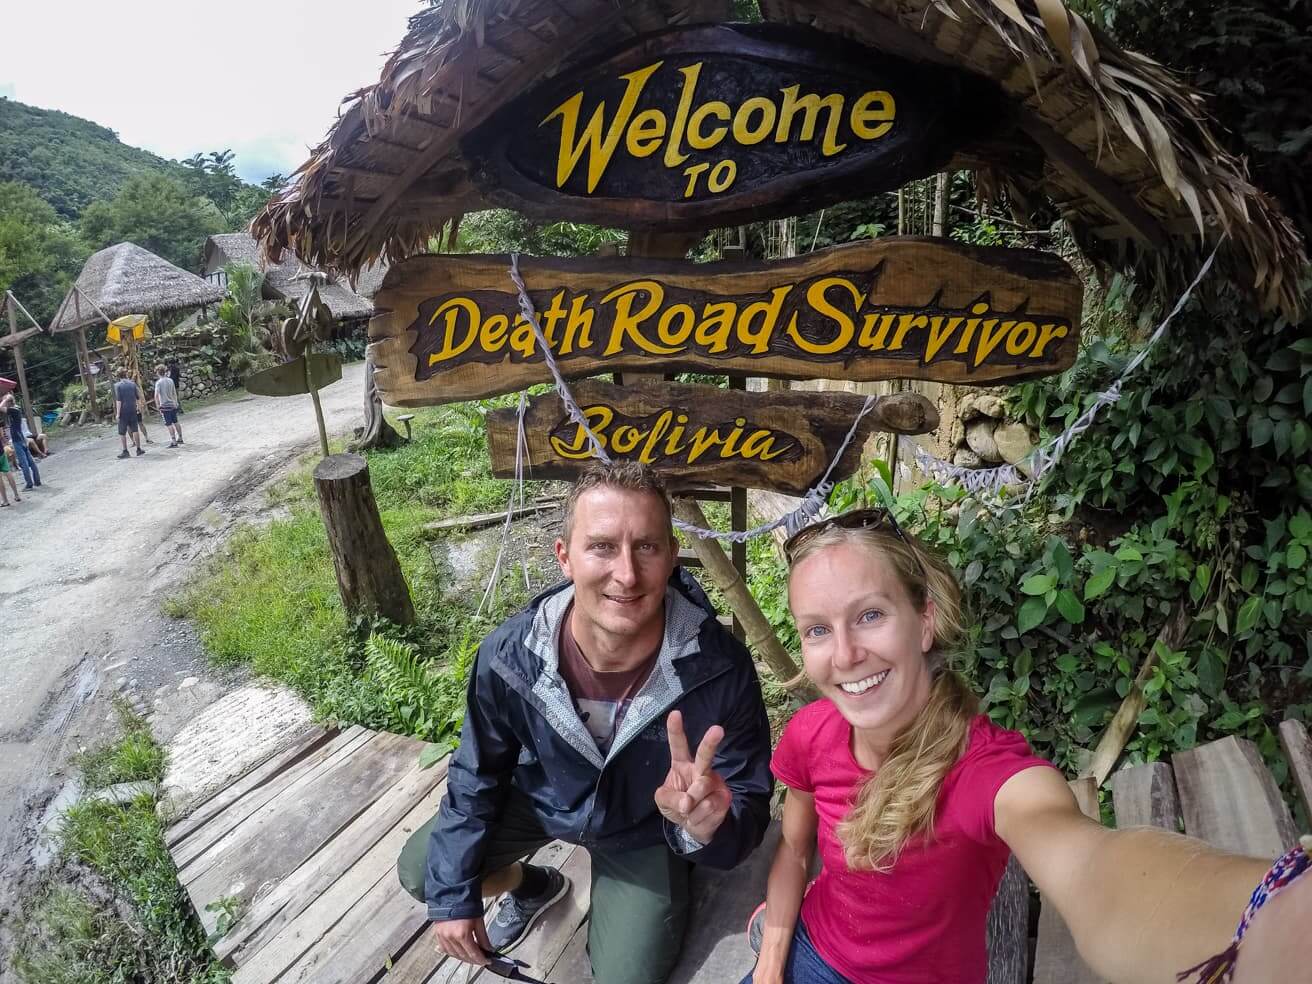 Biking Death Road, Bolivia - tourist attraction or the real deal